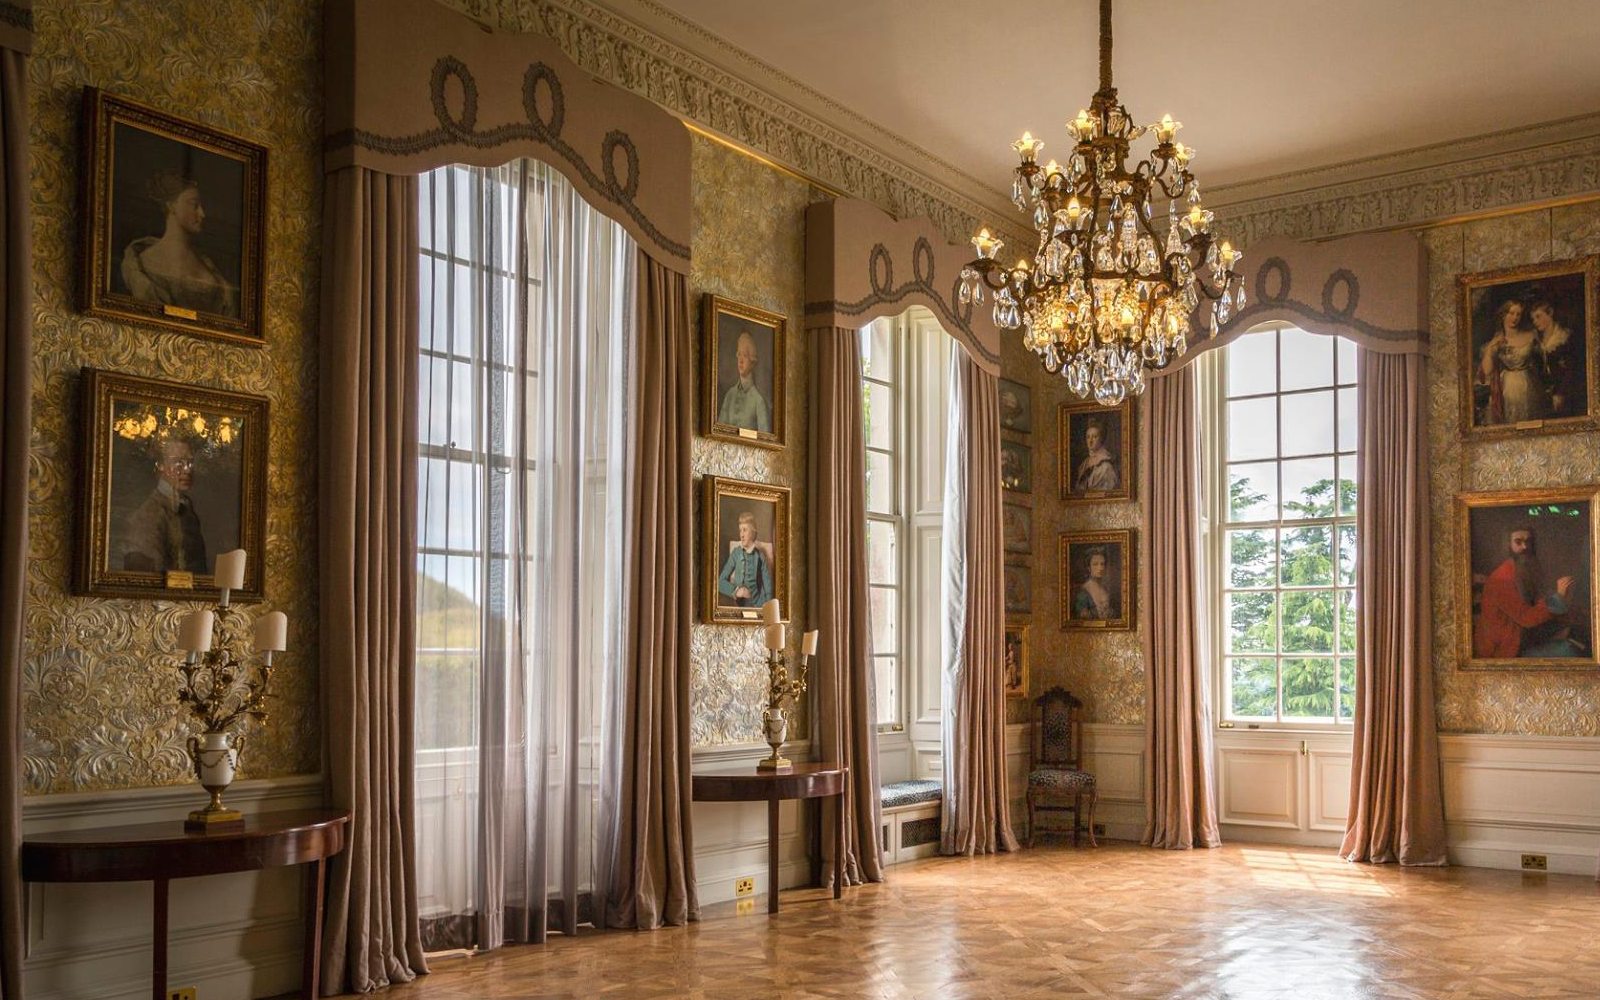 Inside the ornate interiors of Stansted Park's great house